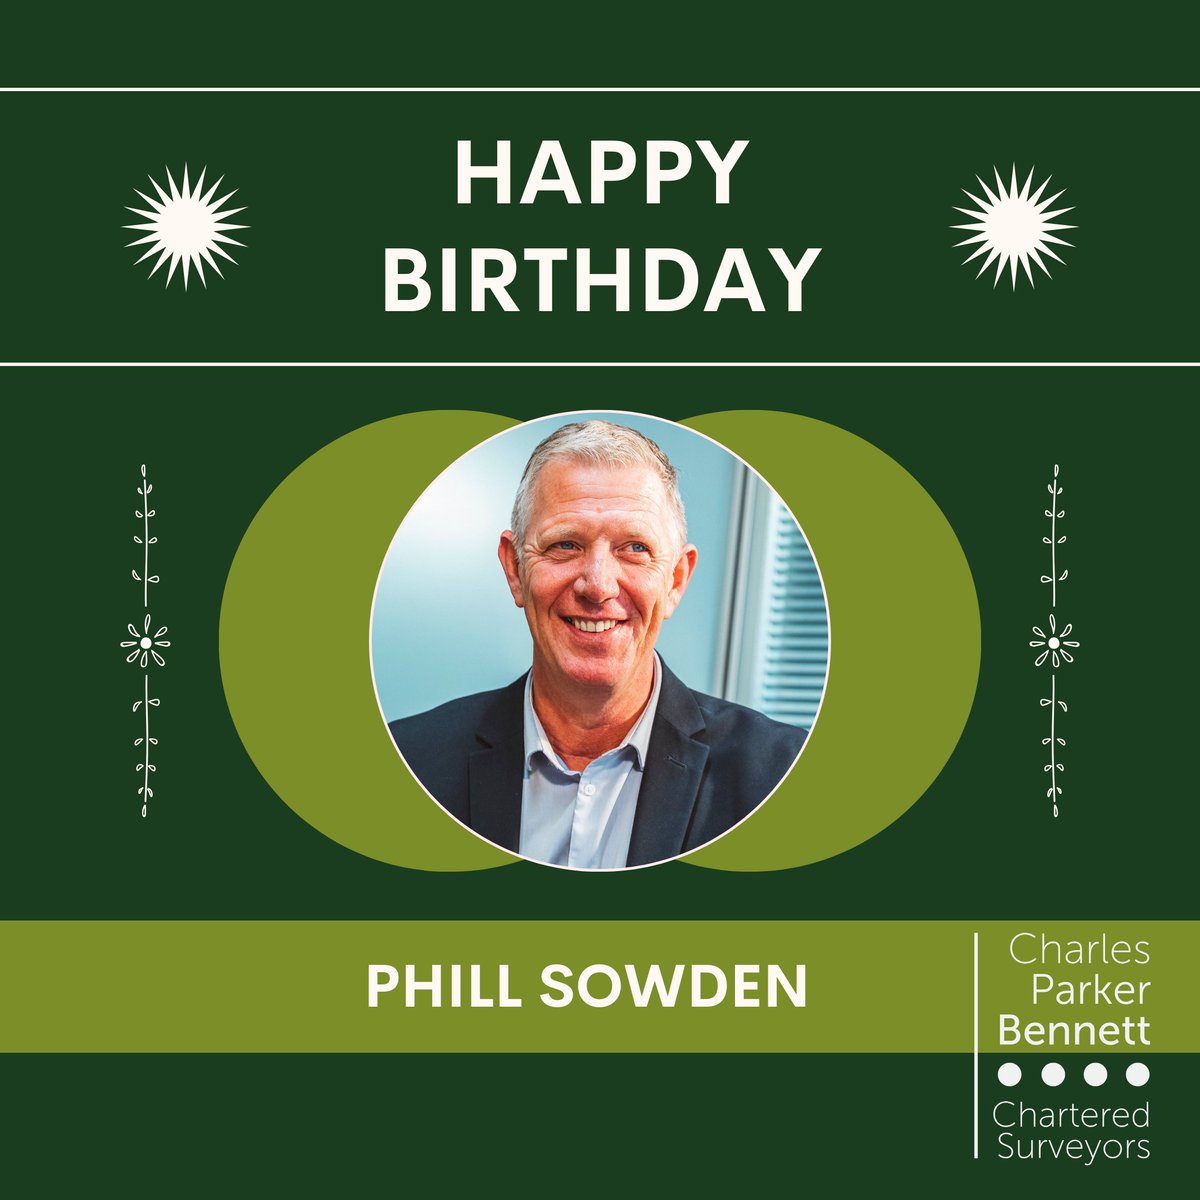 The Charles Parker Bennett and @ParkinsonRE teams would like to wish Phill Sowden a very happy birthday today! 

As with all employees, we have left him a little something to enjoy on his special day! 🍷🎂

#HappyBirthday #Celebration #CharlesParkerBennett #ParkinsonRealEstate